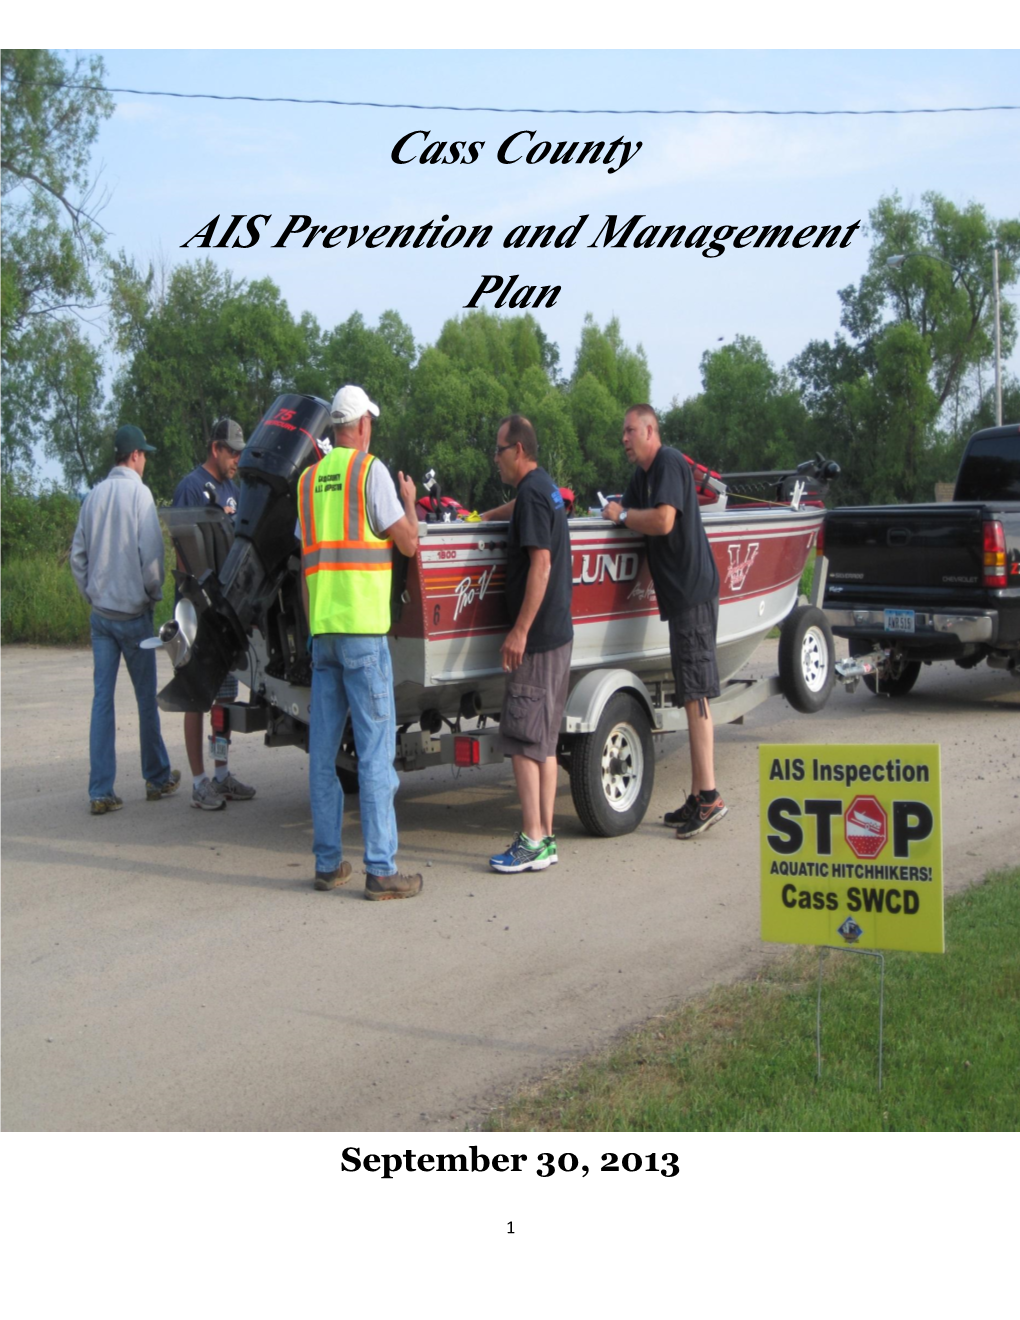 Cass County AIS Prevention and Management Plan